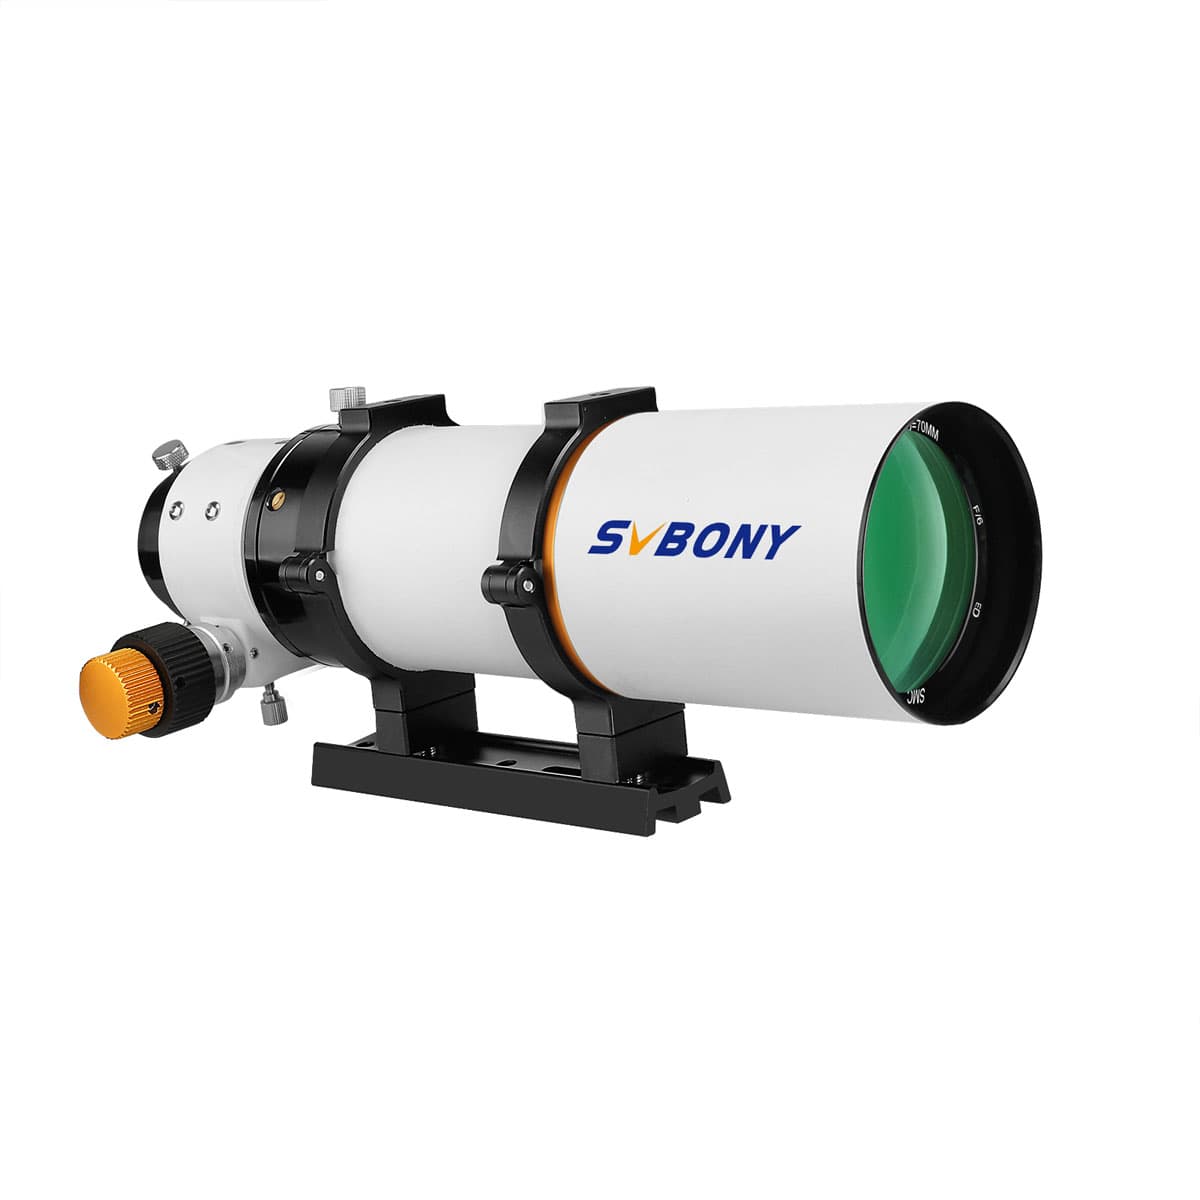 Svbony SV503 Telescope ED 70mm F6 Doublet Refractor for Astronomy - F9359A